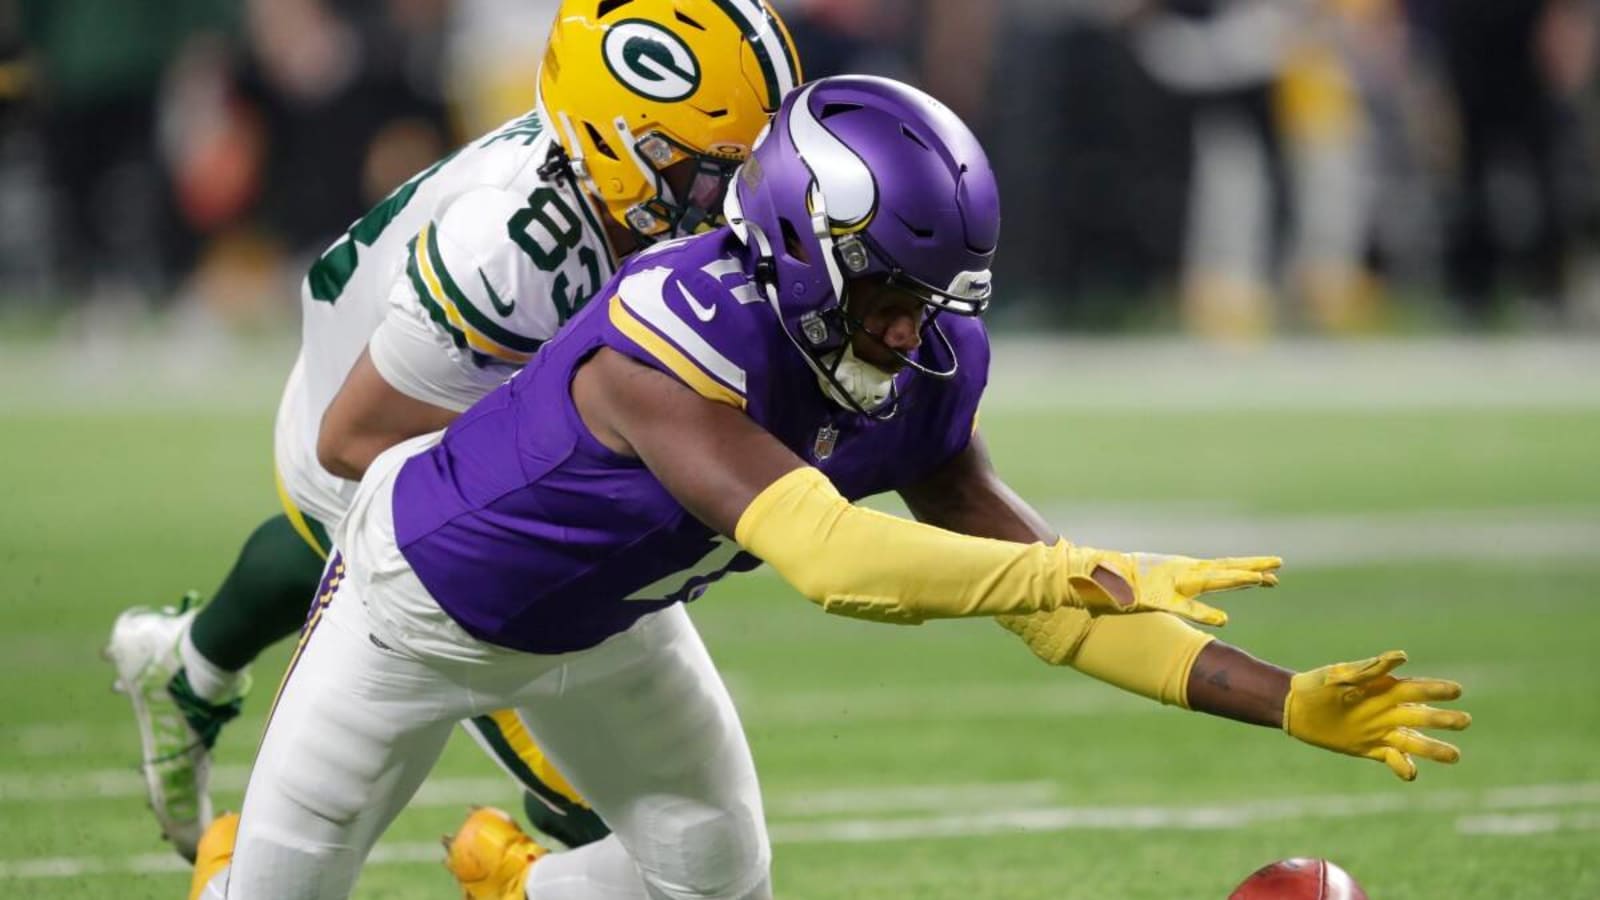 NaJee Thompson has been a bright spot for Vikings&#39; special teams